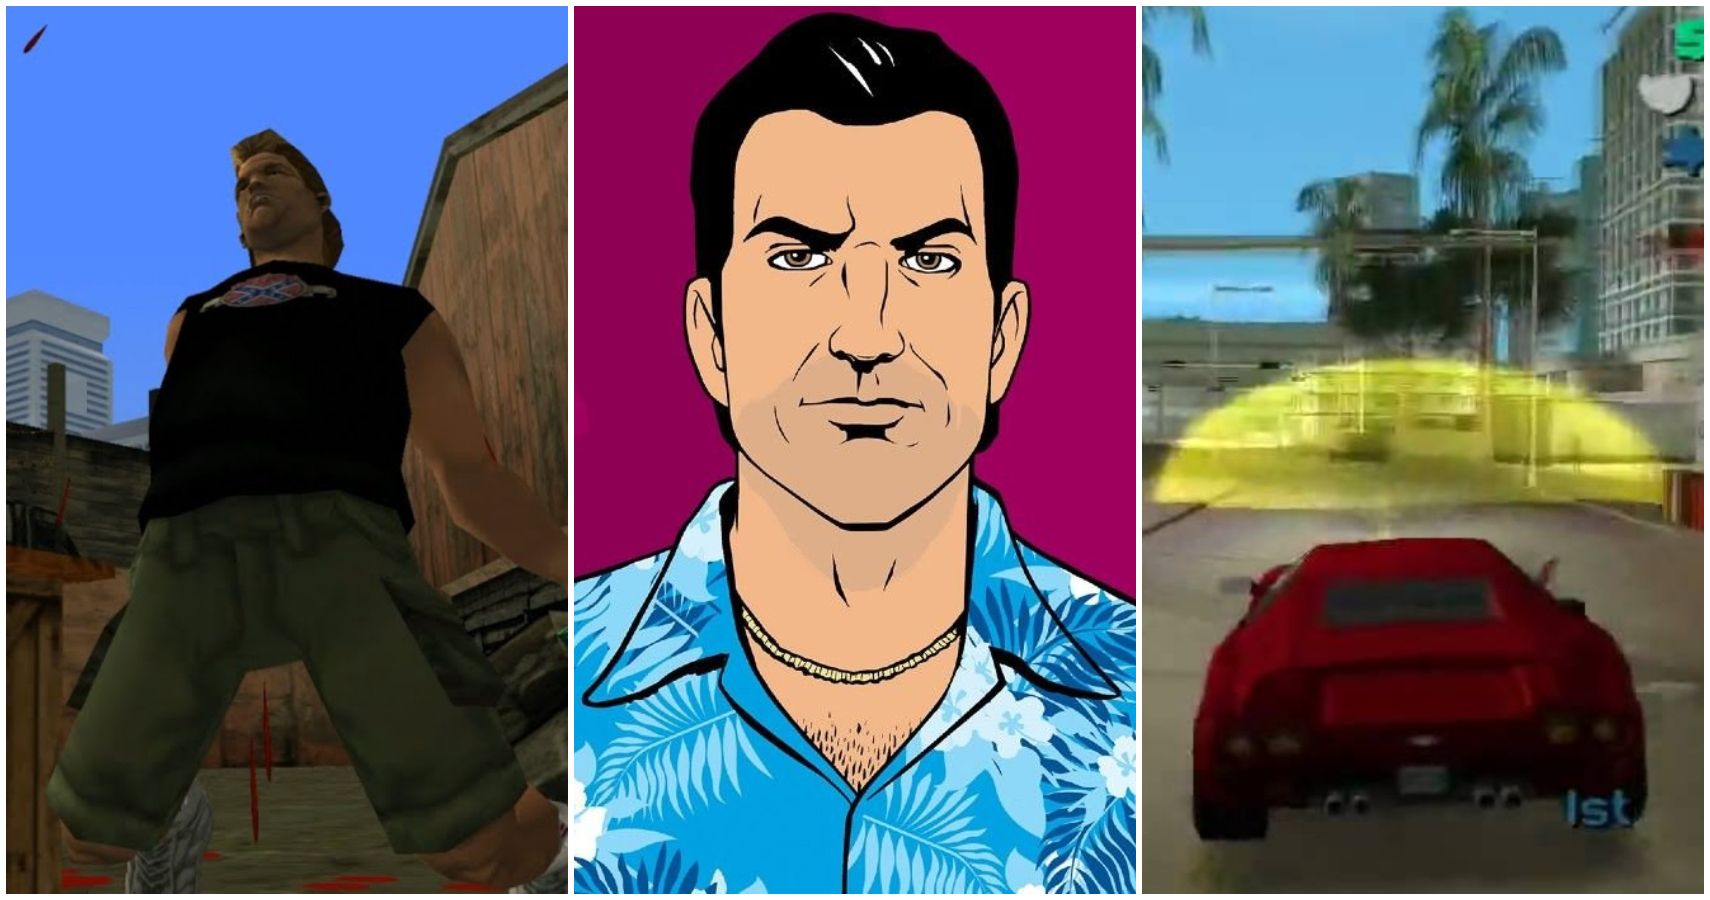 5 Pro Tips & Tricks For Players To Use In Grand Theft Auto: Vice City - The  Definitive Edition